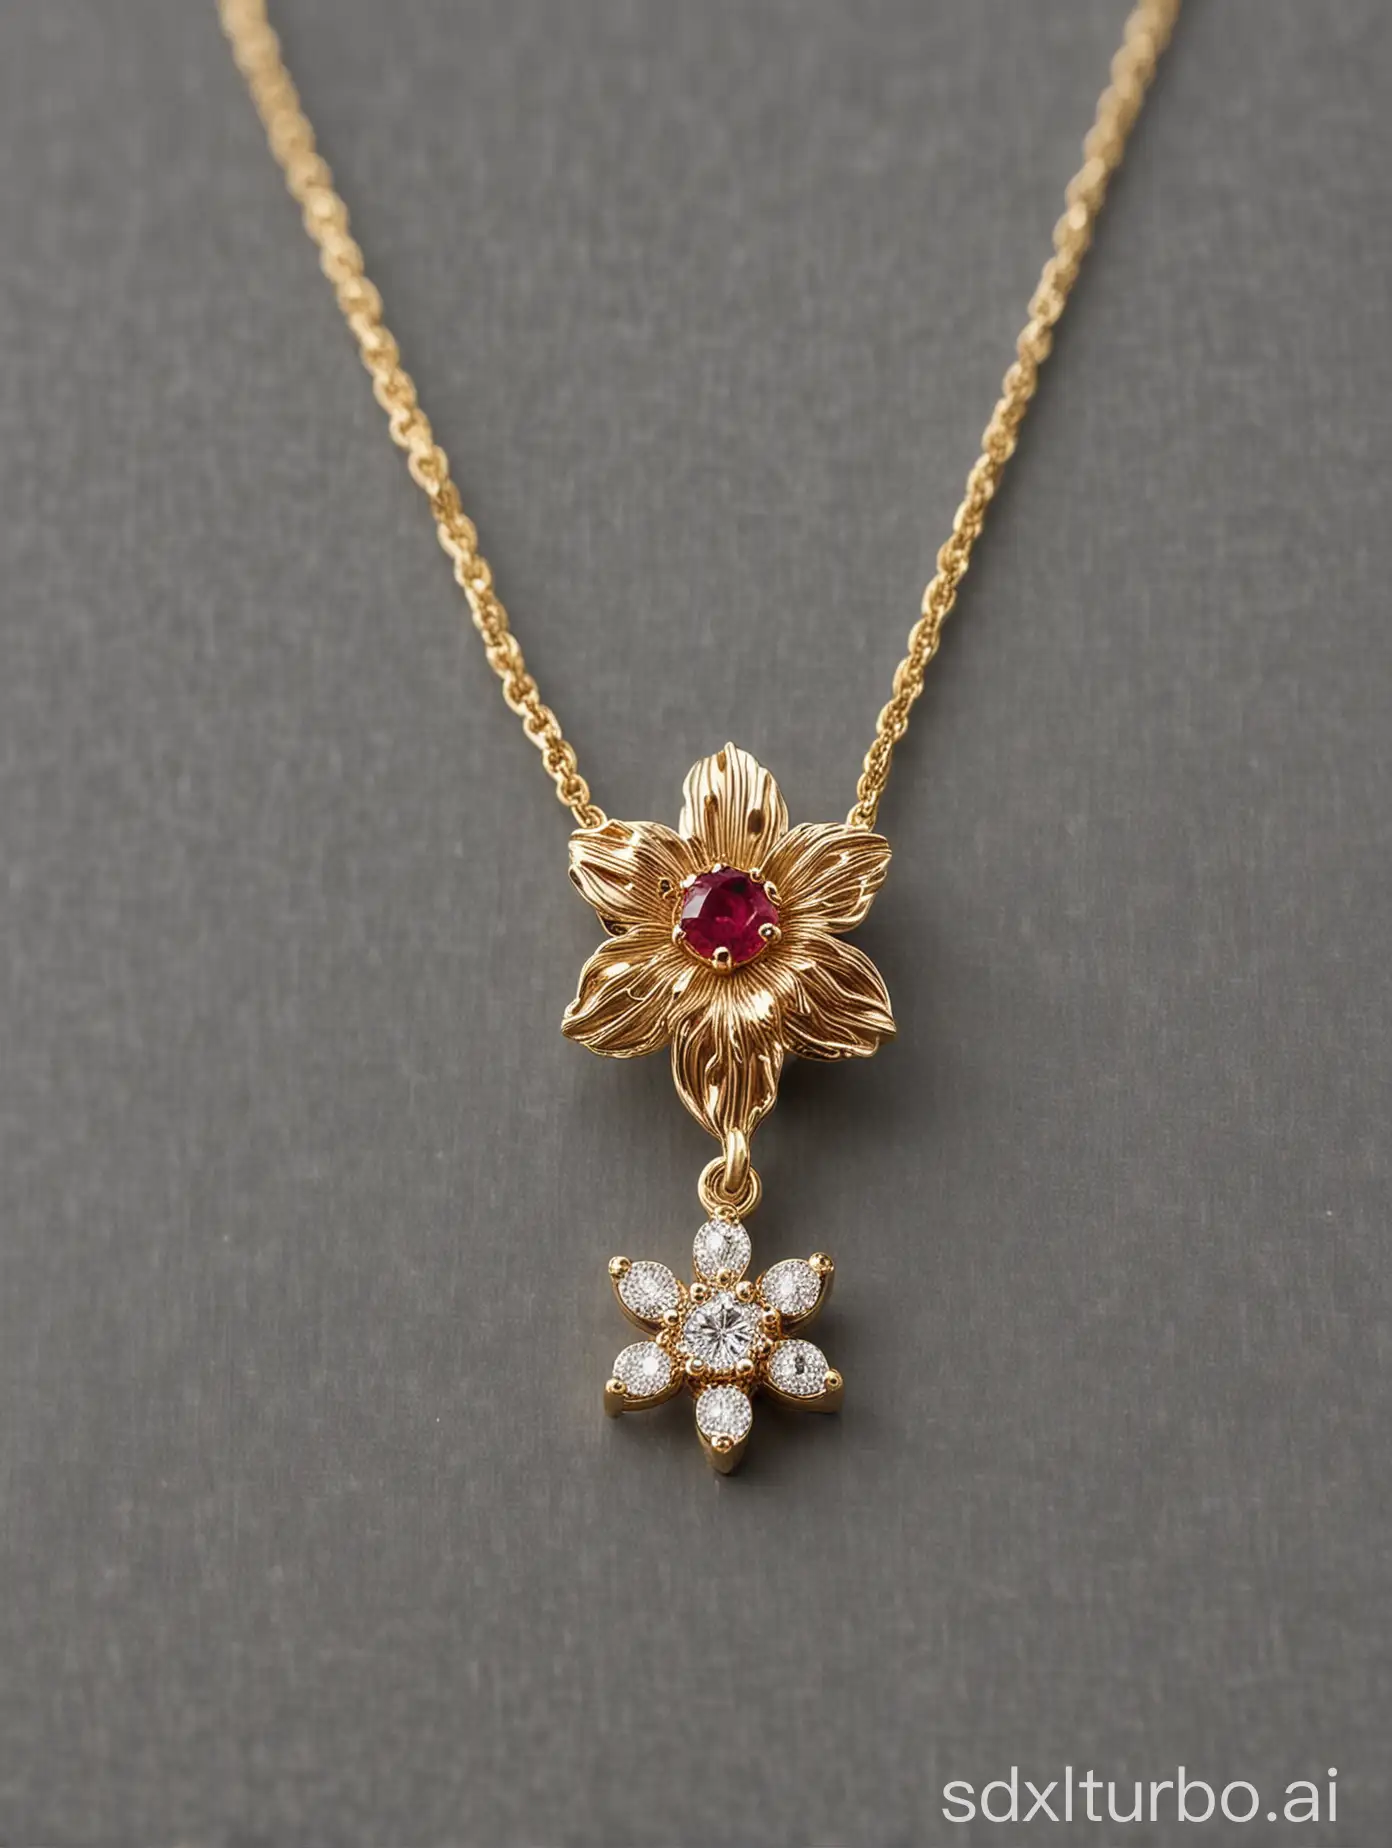 Exquisite-Gold-Necklace-with-Diamond-Flower-Pendant-and-Ruby-Center